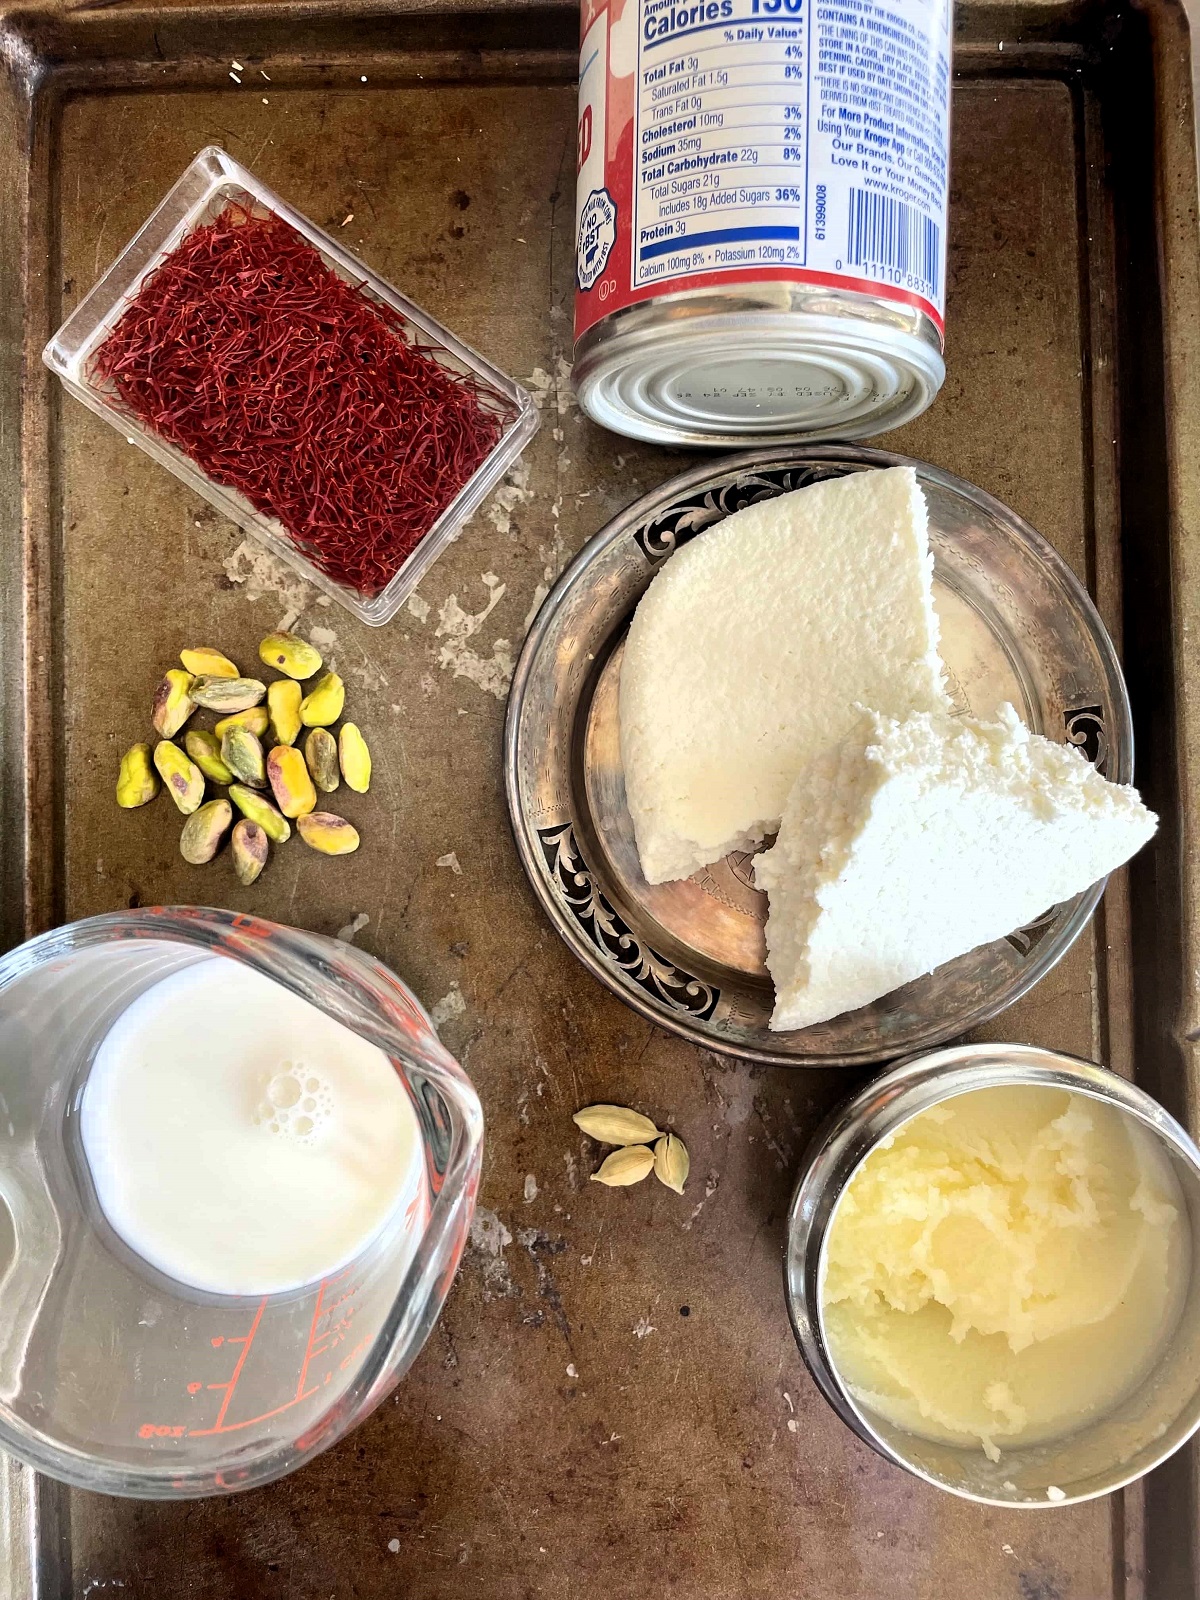 Saffron, pistachios, milk, cardamom and other Peda recipe ingredients on a metal cookie sheet.